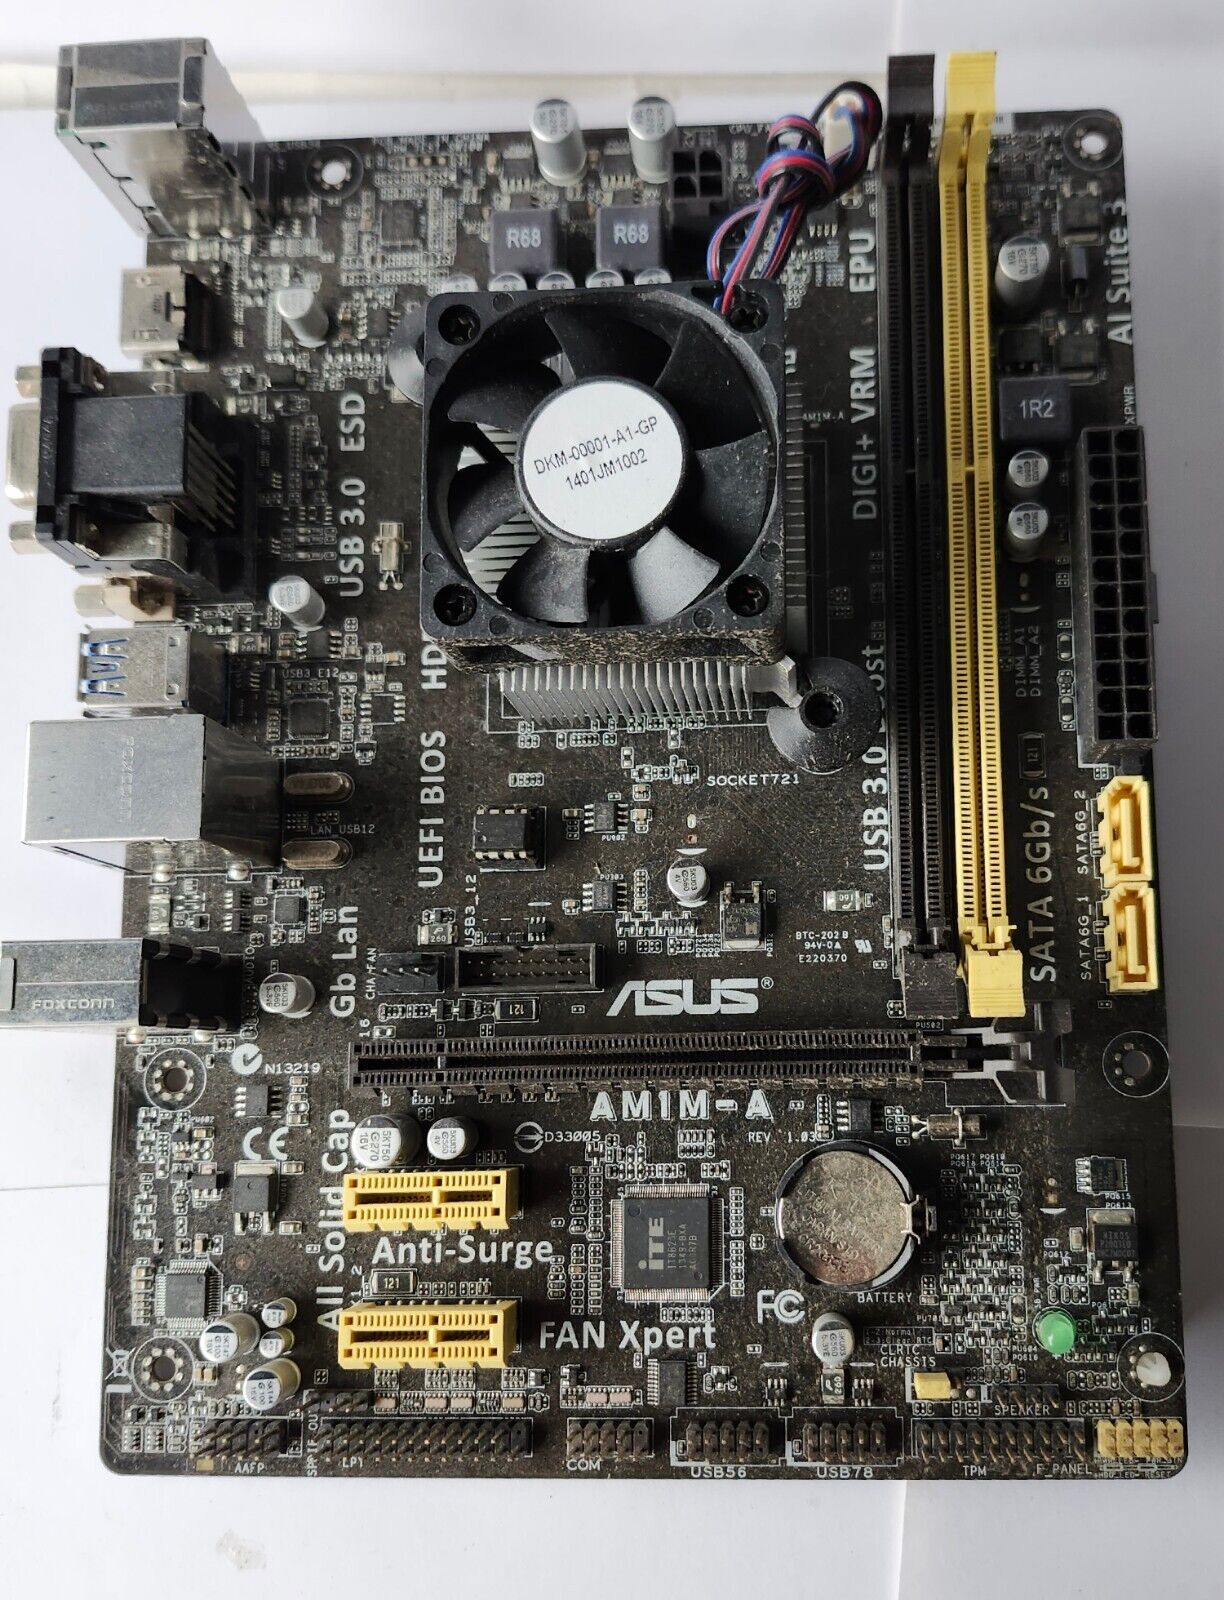 ASUS AM1M-A motherboard